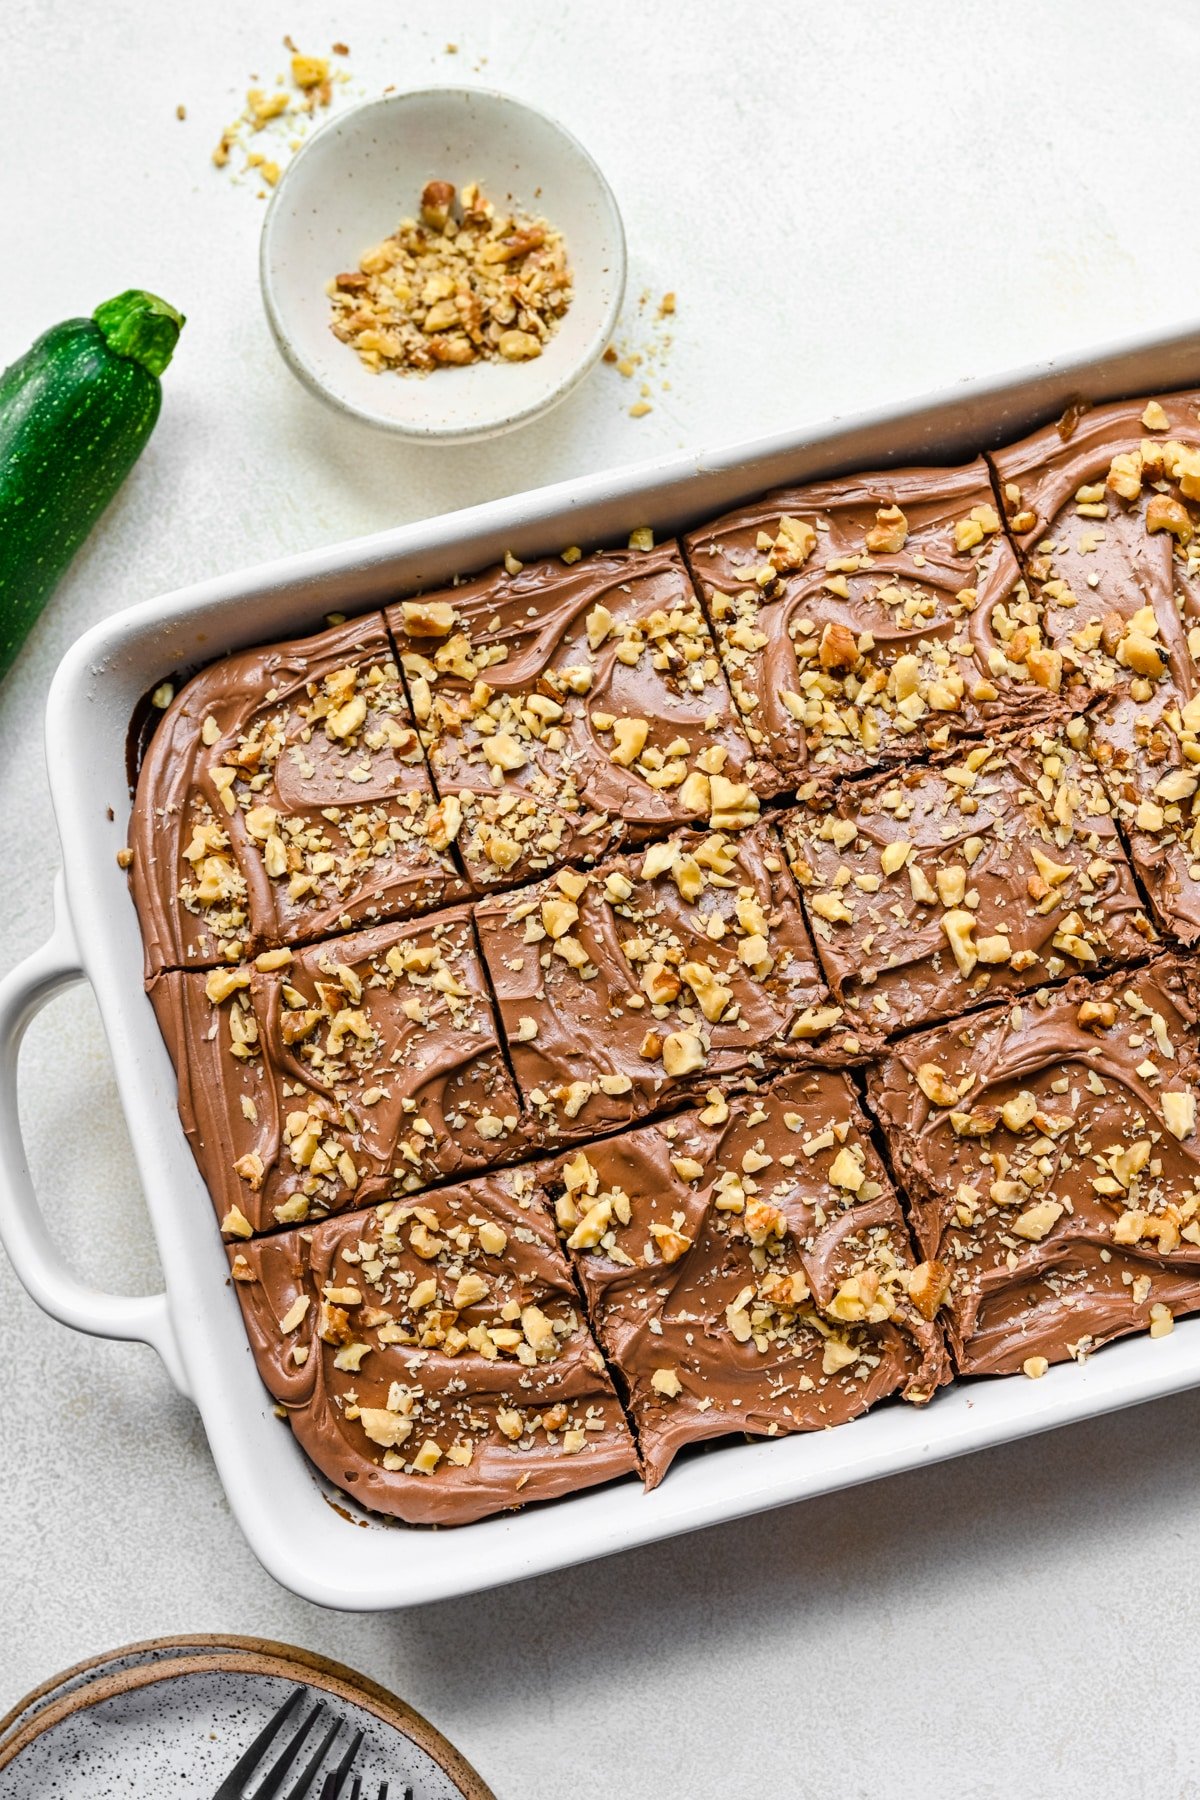 Chocolate zucchini cake in topped with chocolate frosting and chopped nuts in a baking pan.